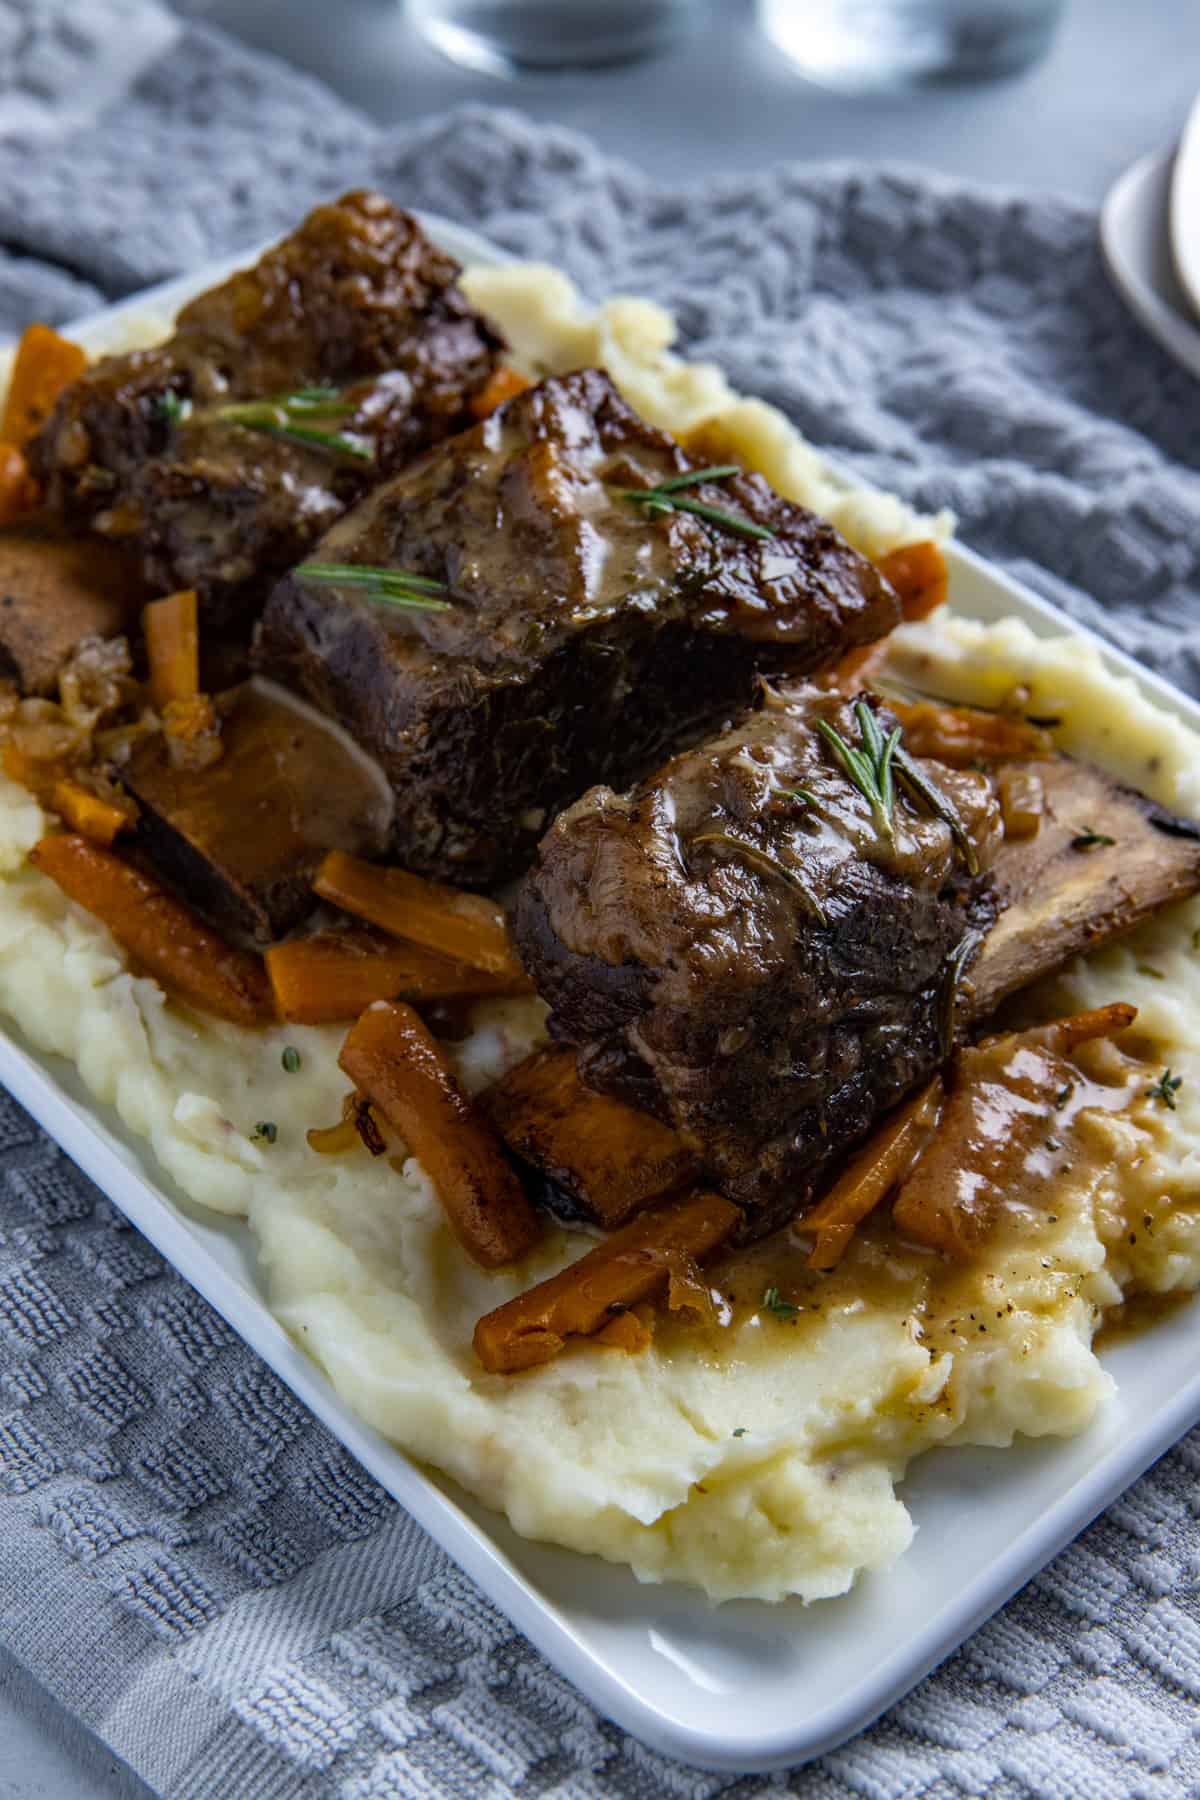 Cooked beef ribs on a bed of mashed potatoes with onions and carrots scattered around.